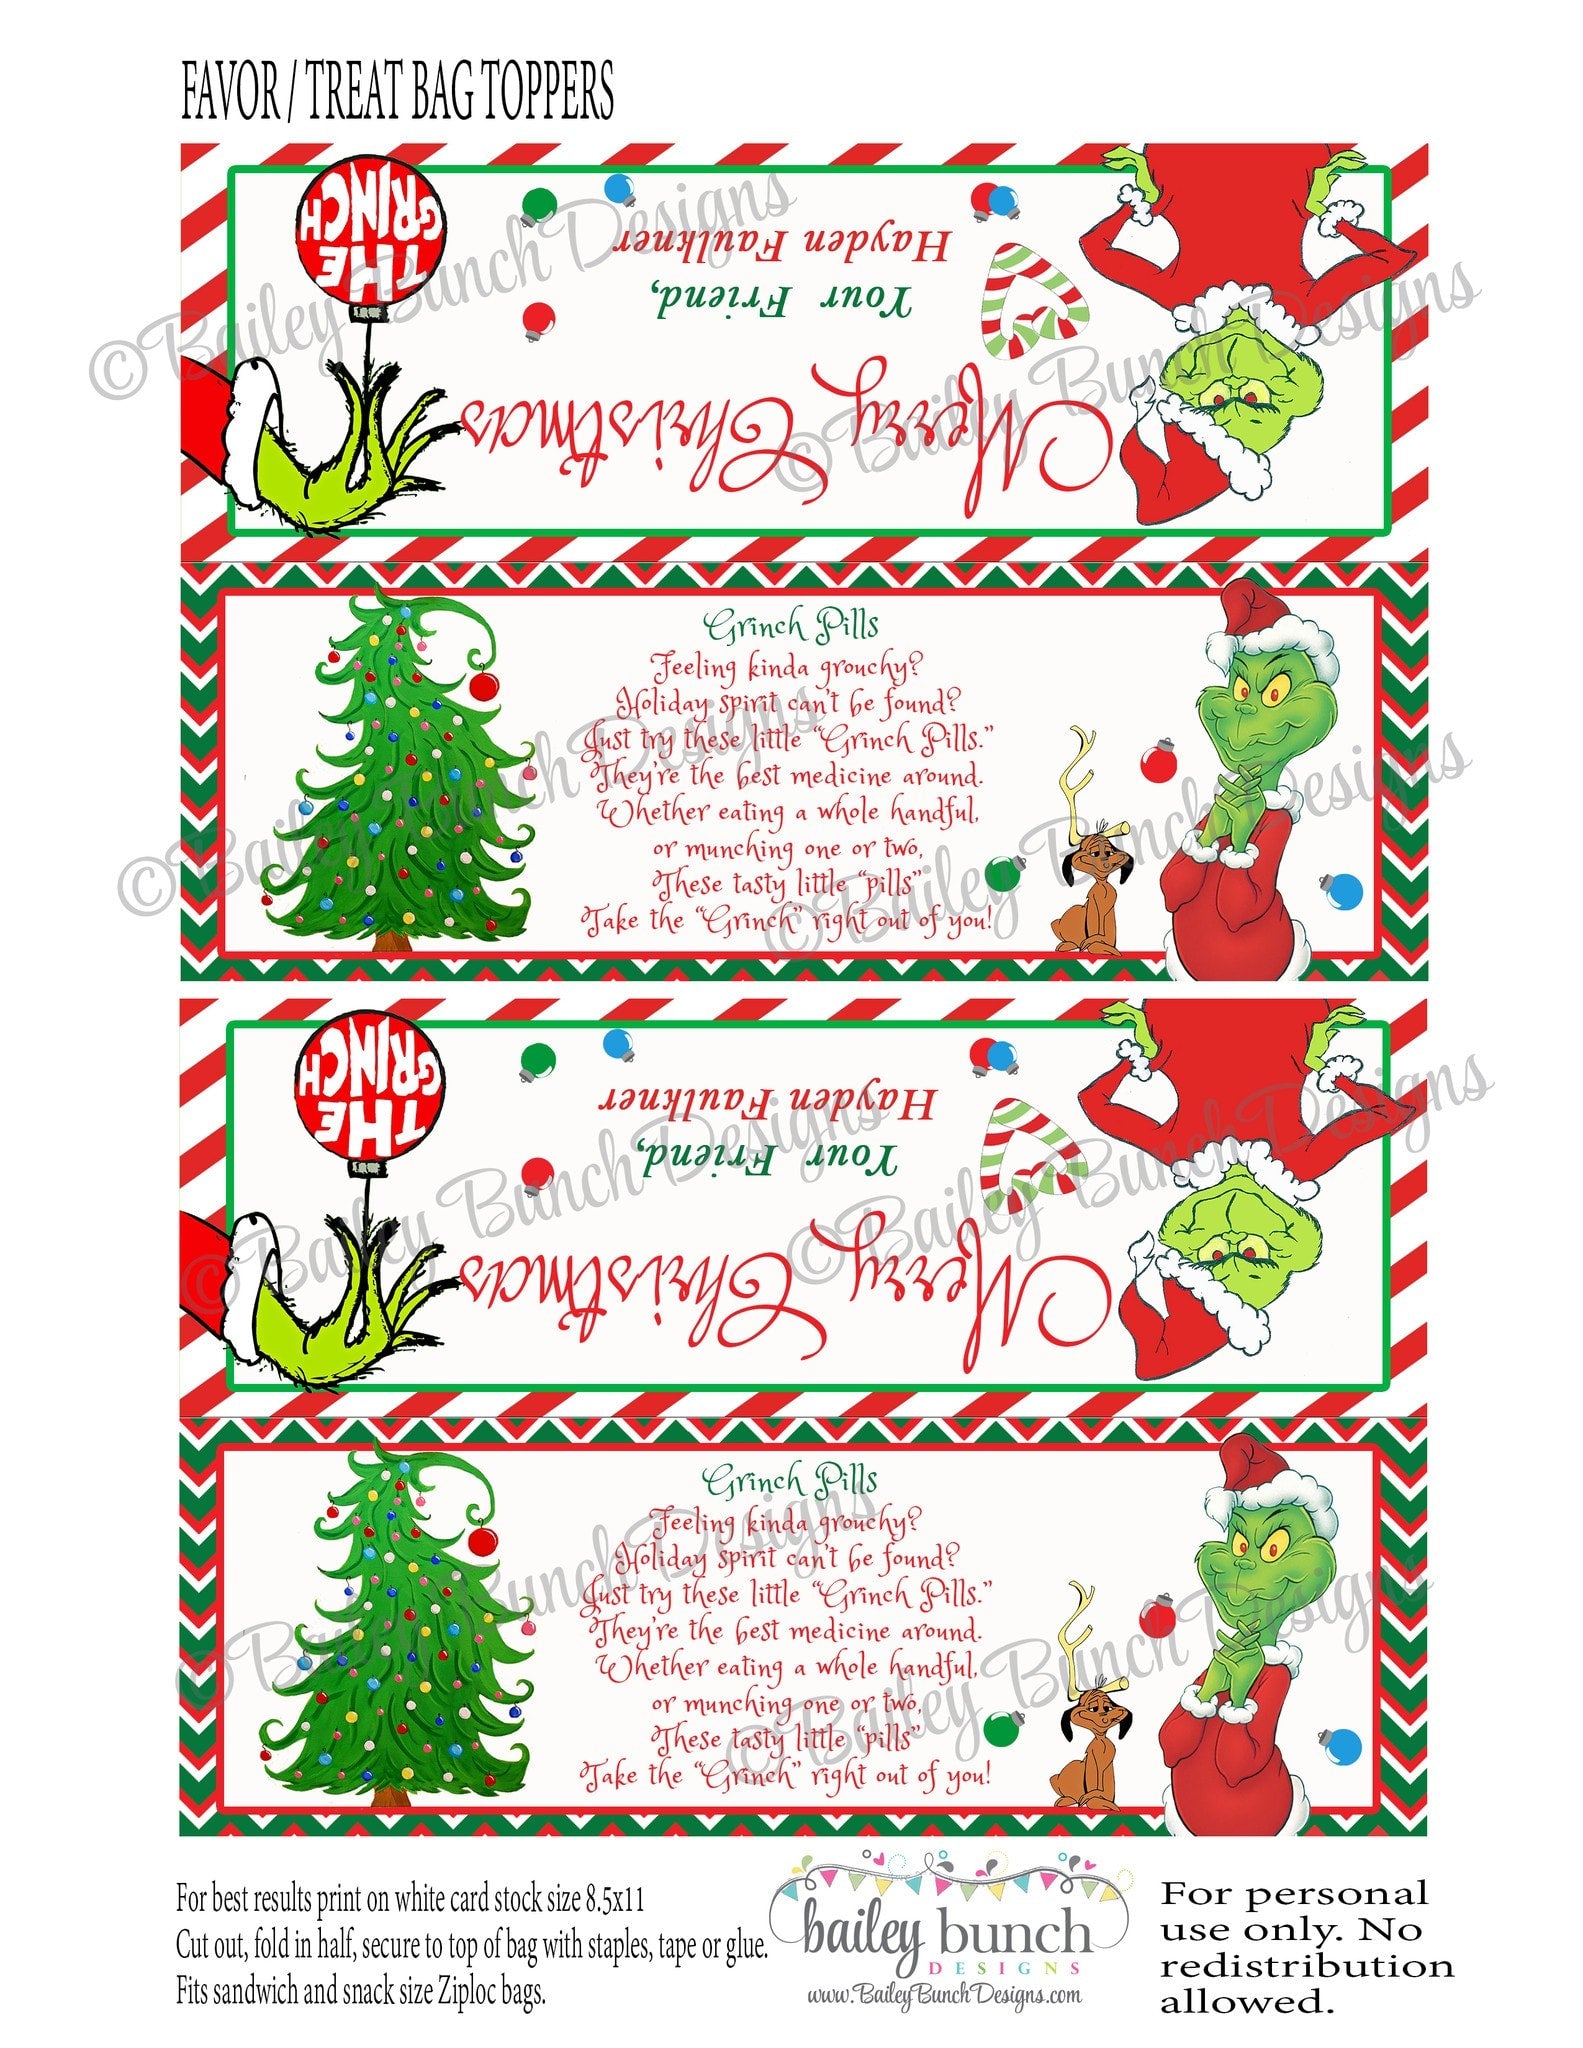 grinch-pills-treat-bags-christmas-toppers-idgrinch0520-bailey-bunch-designs